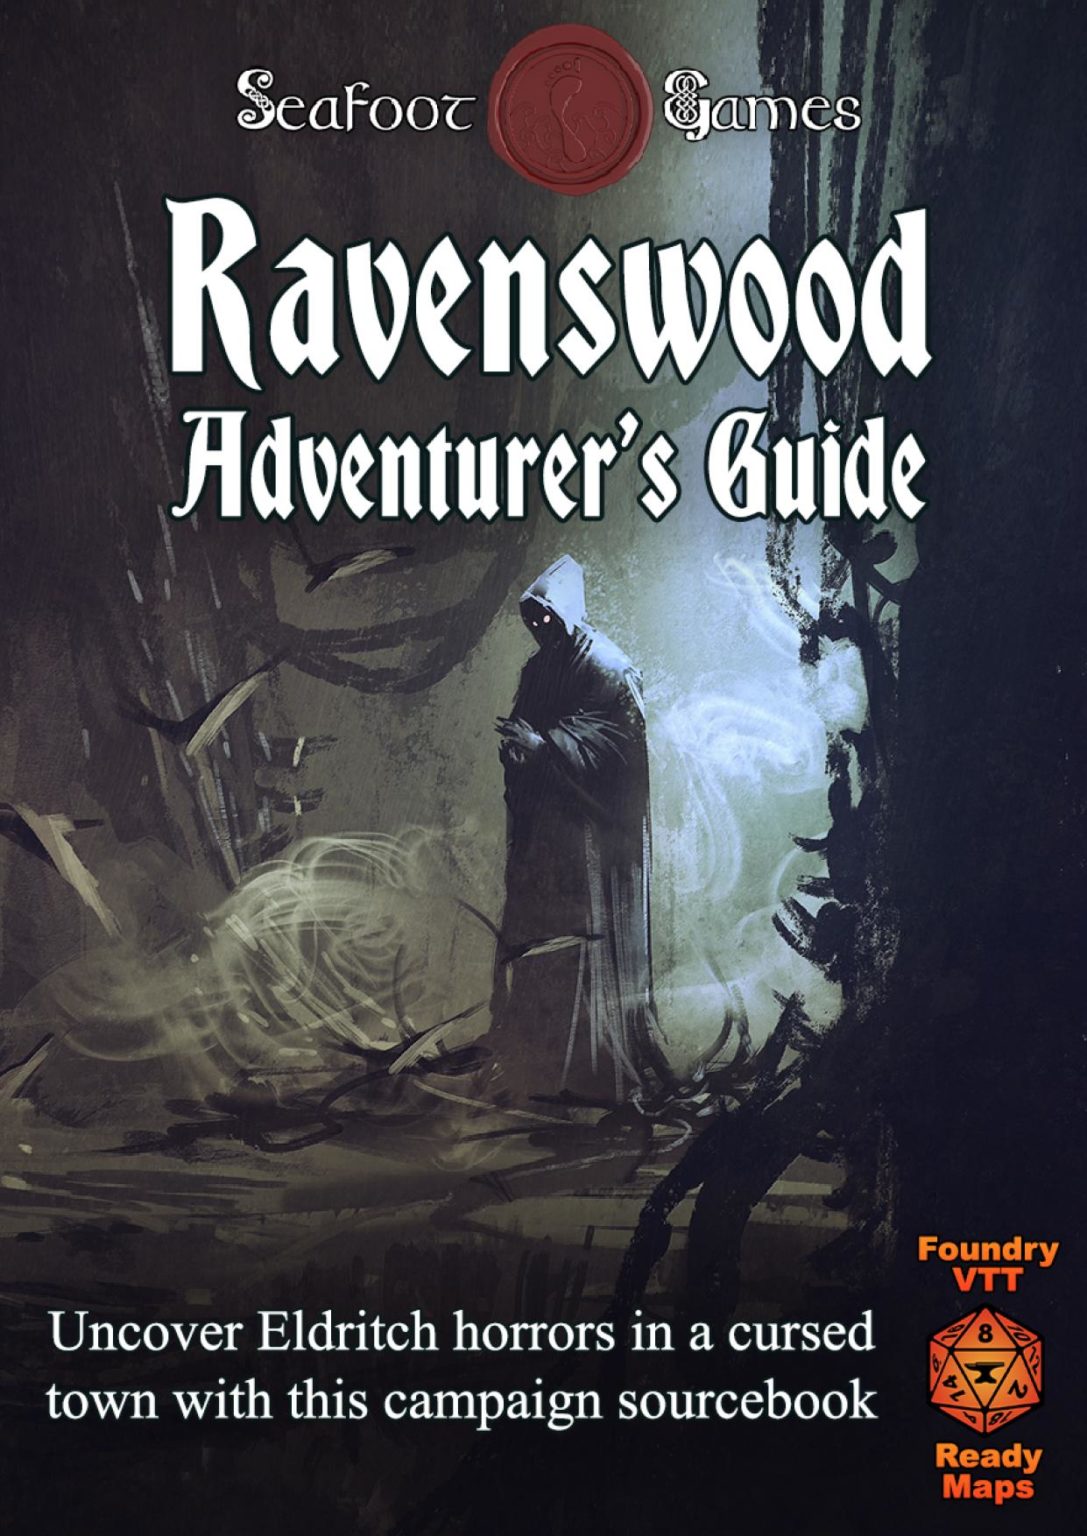 2023 01 18 Ravenswood Cover No Bleeds 1087x1536 